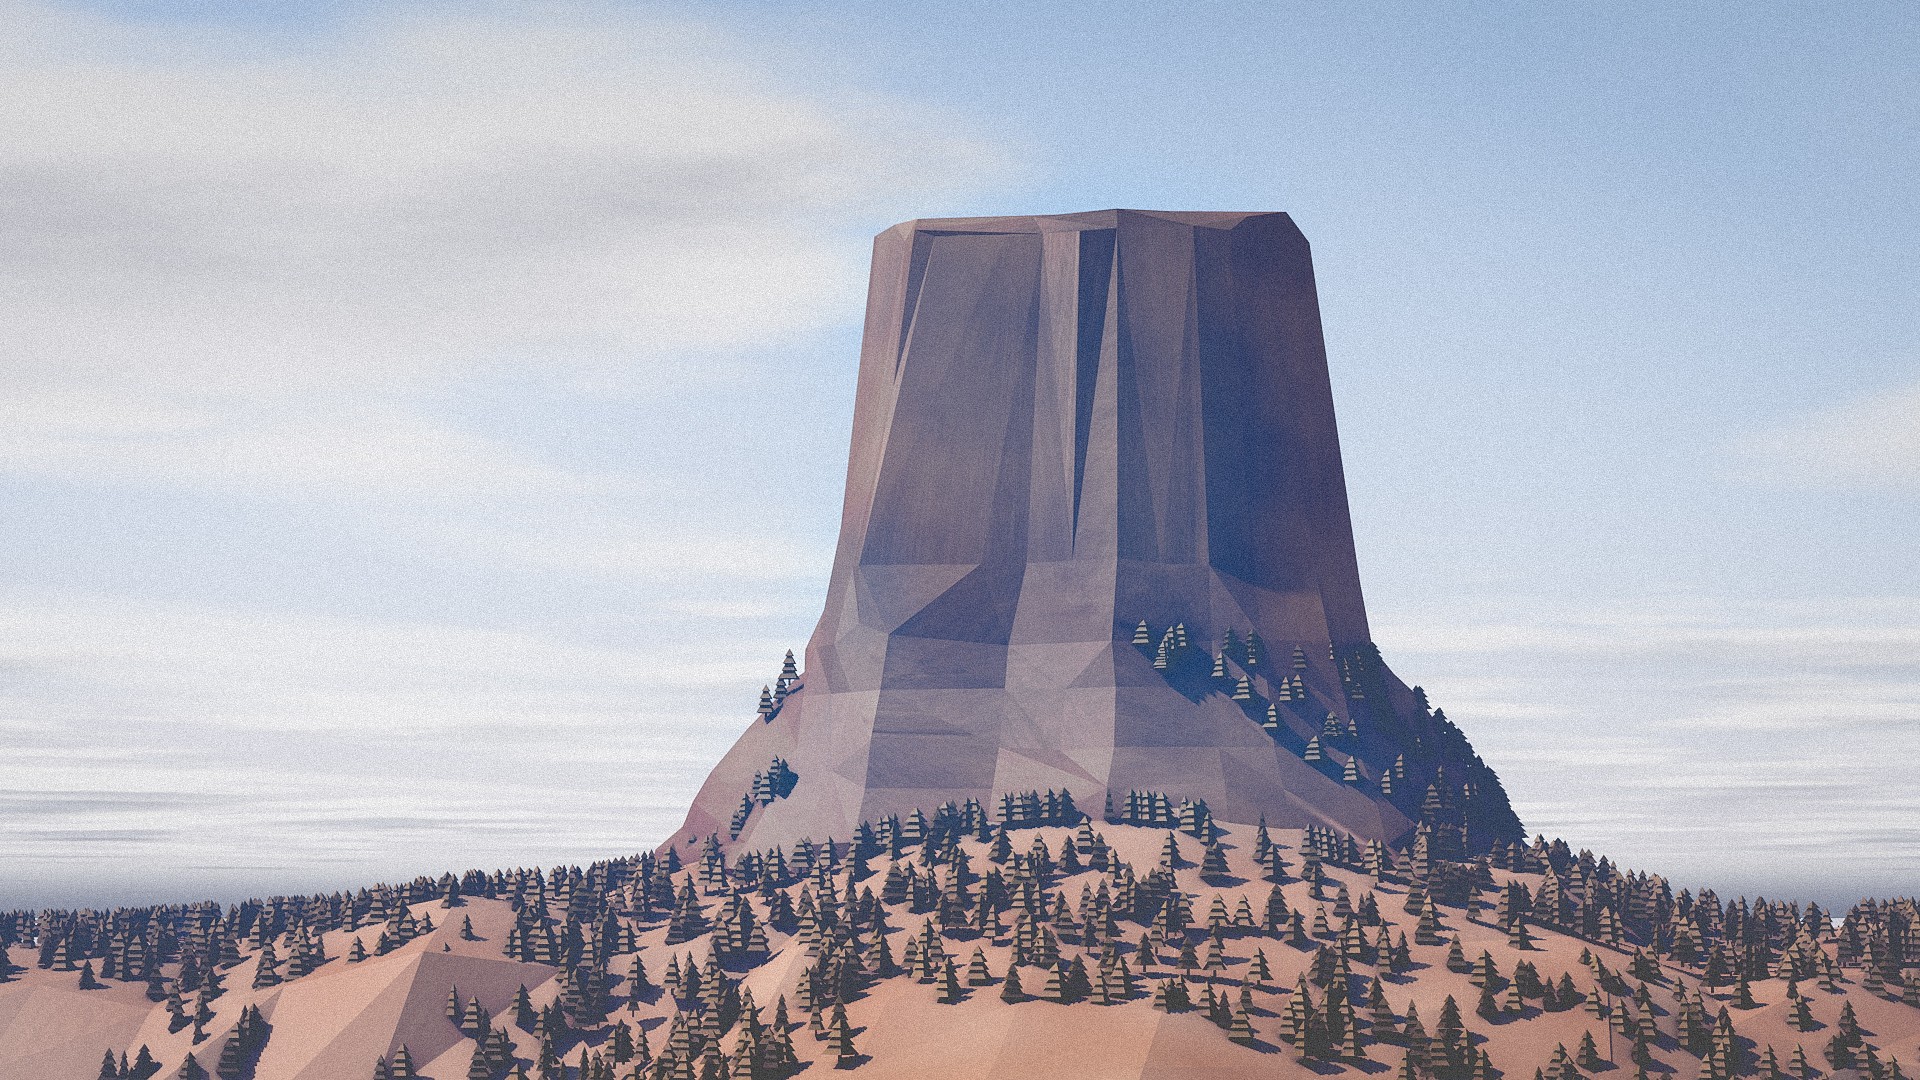 General 1920x1080 low poly mountains trees digital art nature rocks rock formation